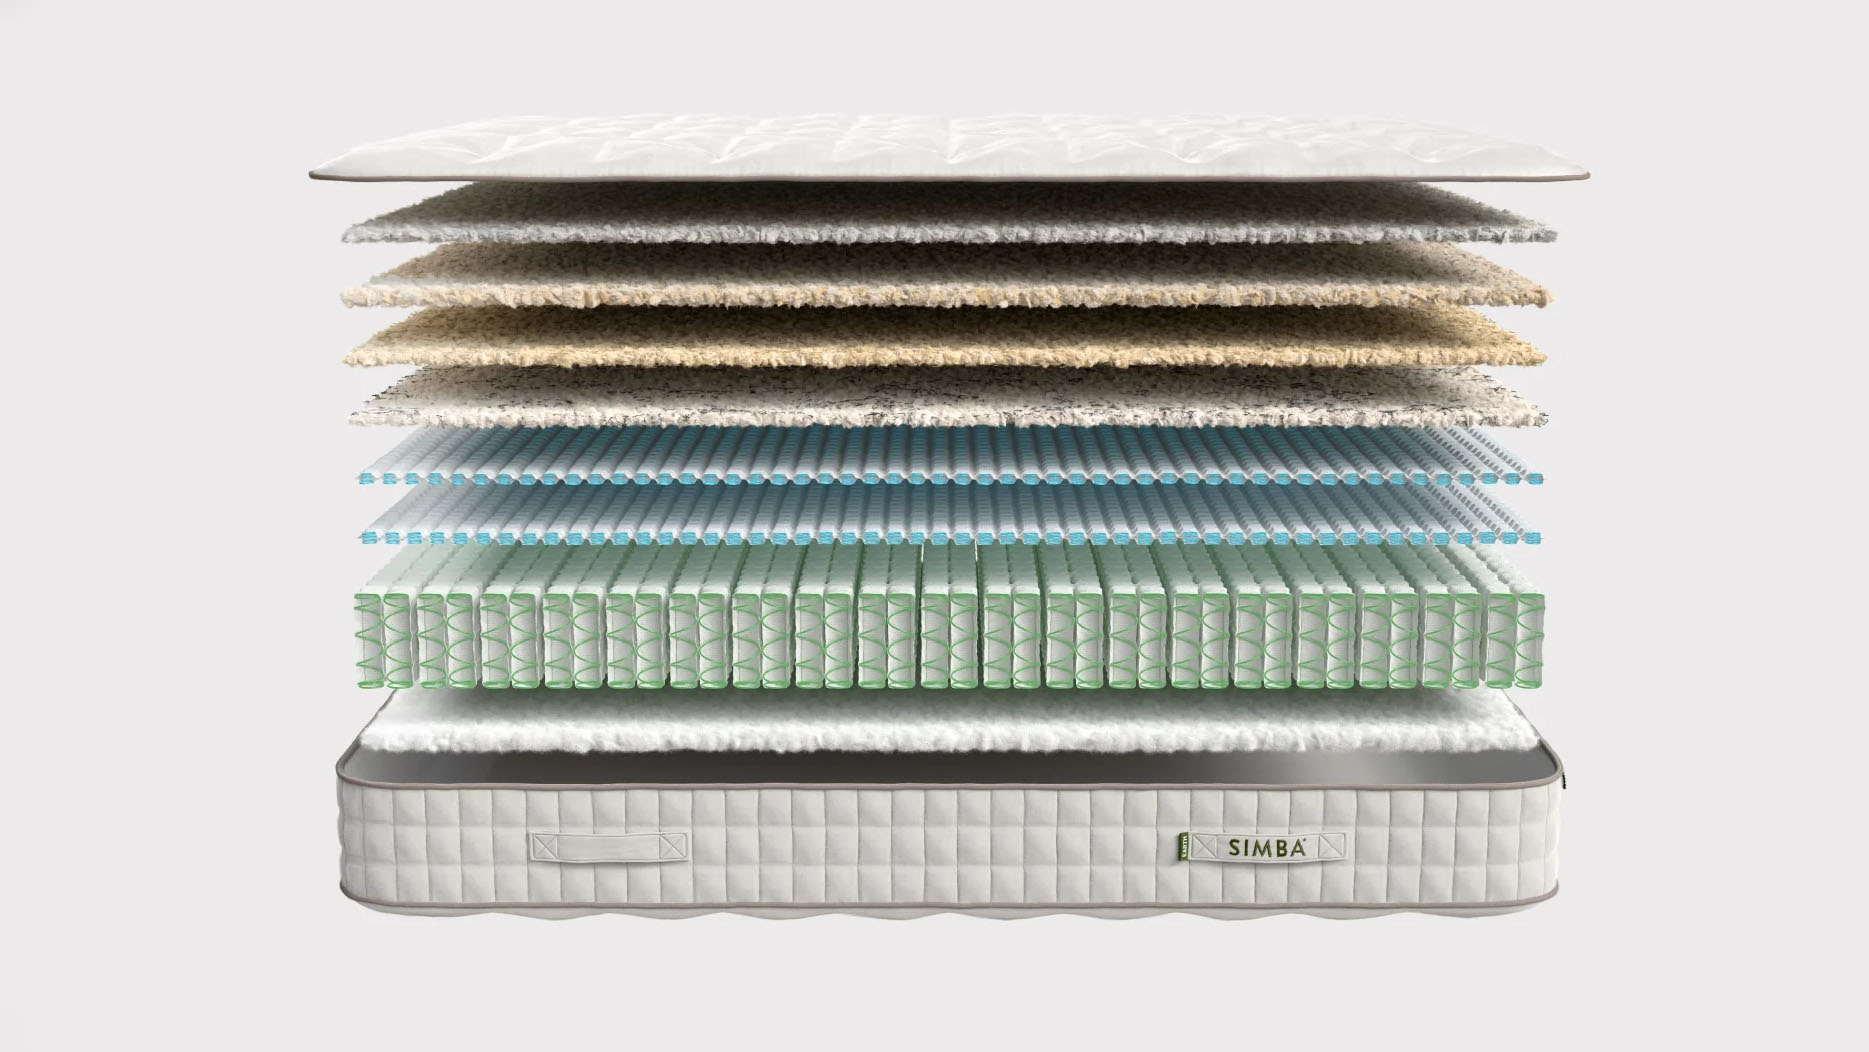 An exploded chart showing the internal layers of the Simba Earth Escape Mattress